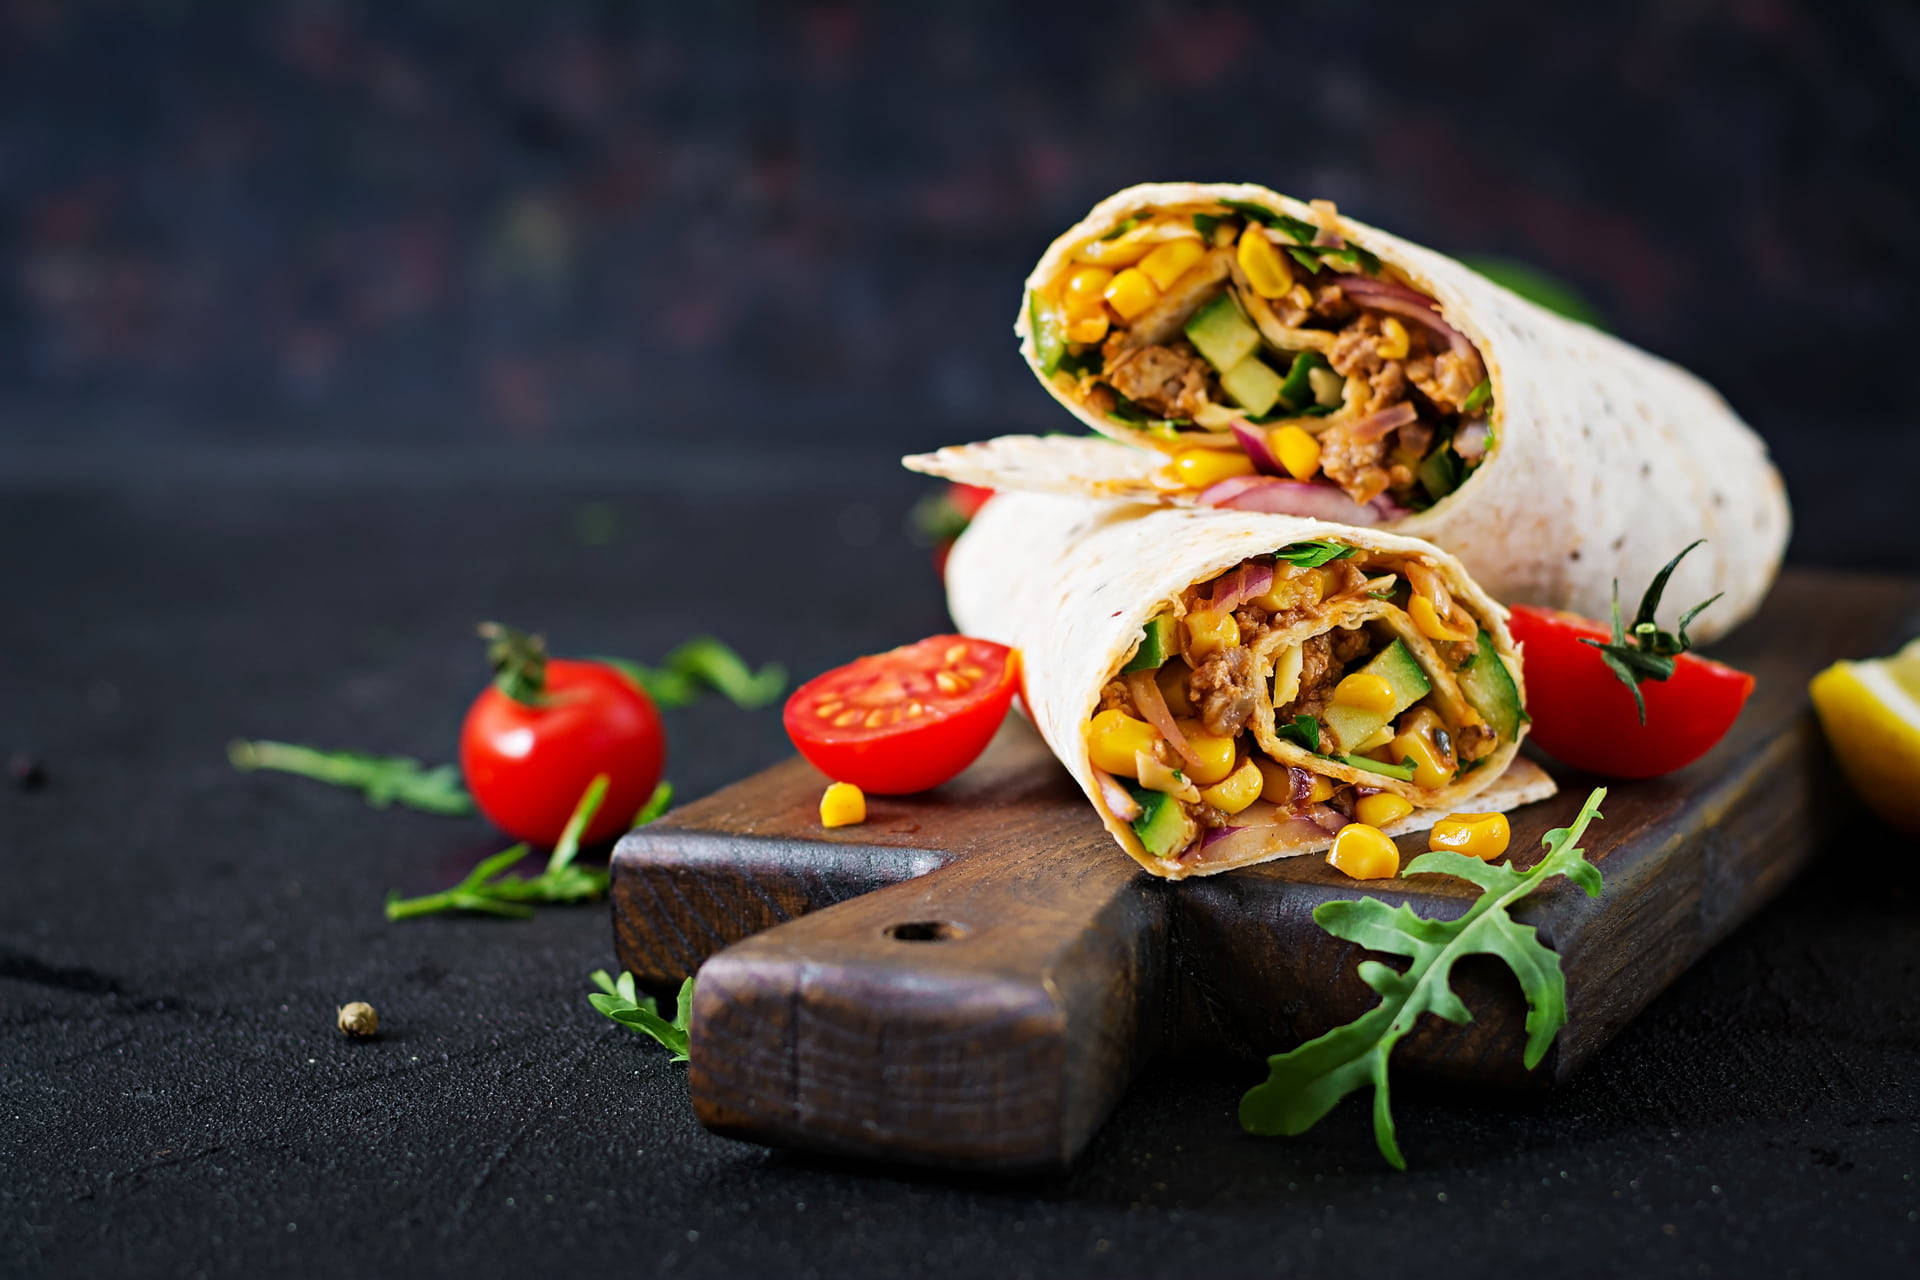 Caption: Savory Beef And Vegetable Burrito Background